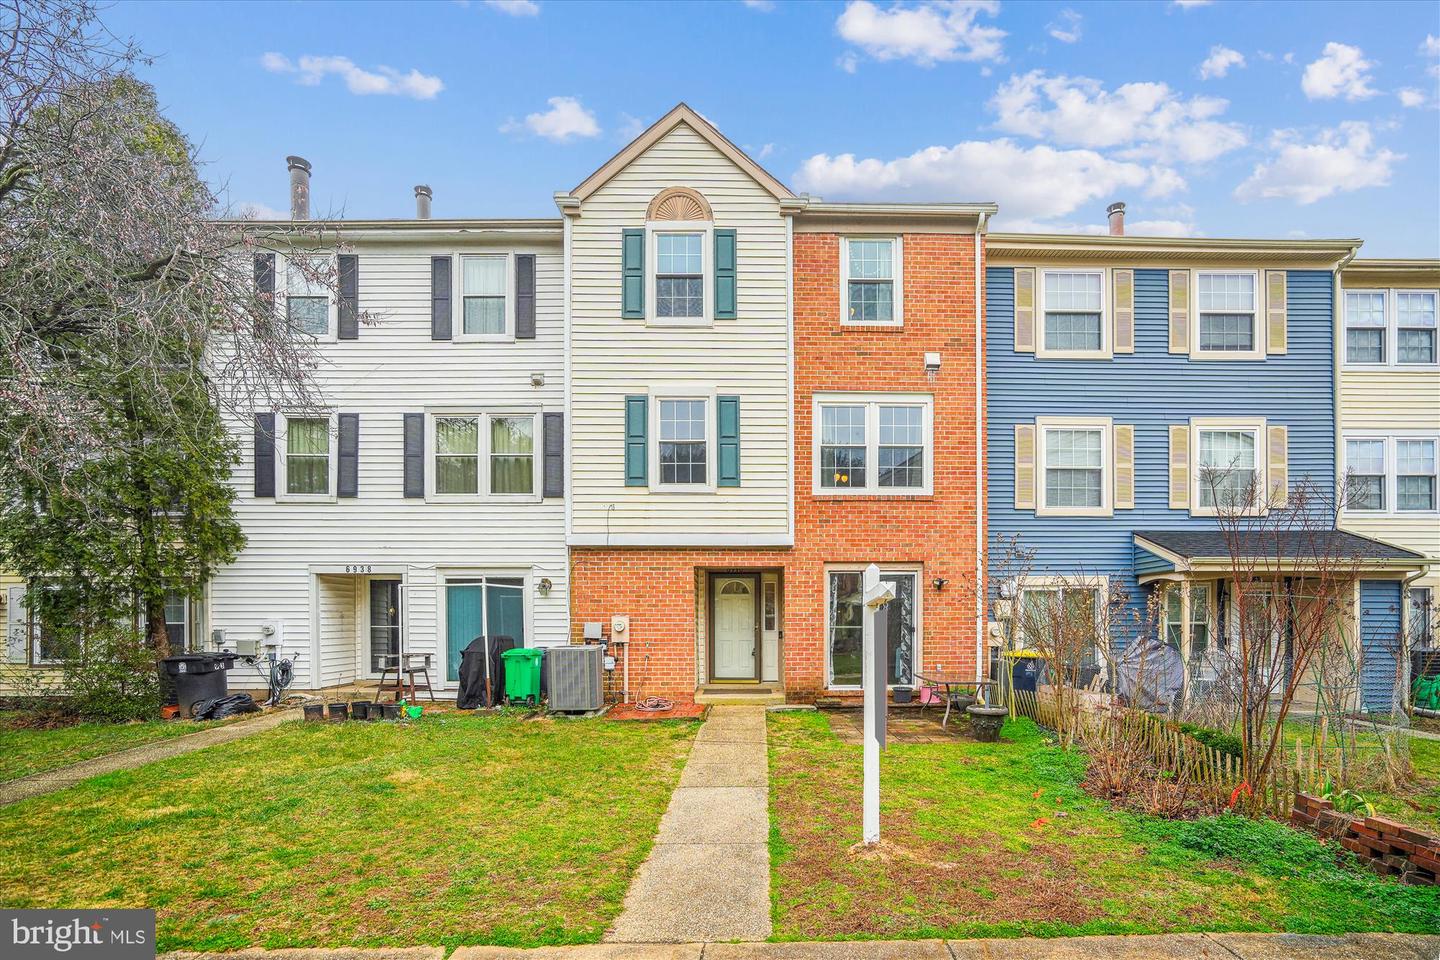 View Laurel, MD 20707 townhome